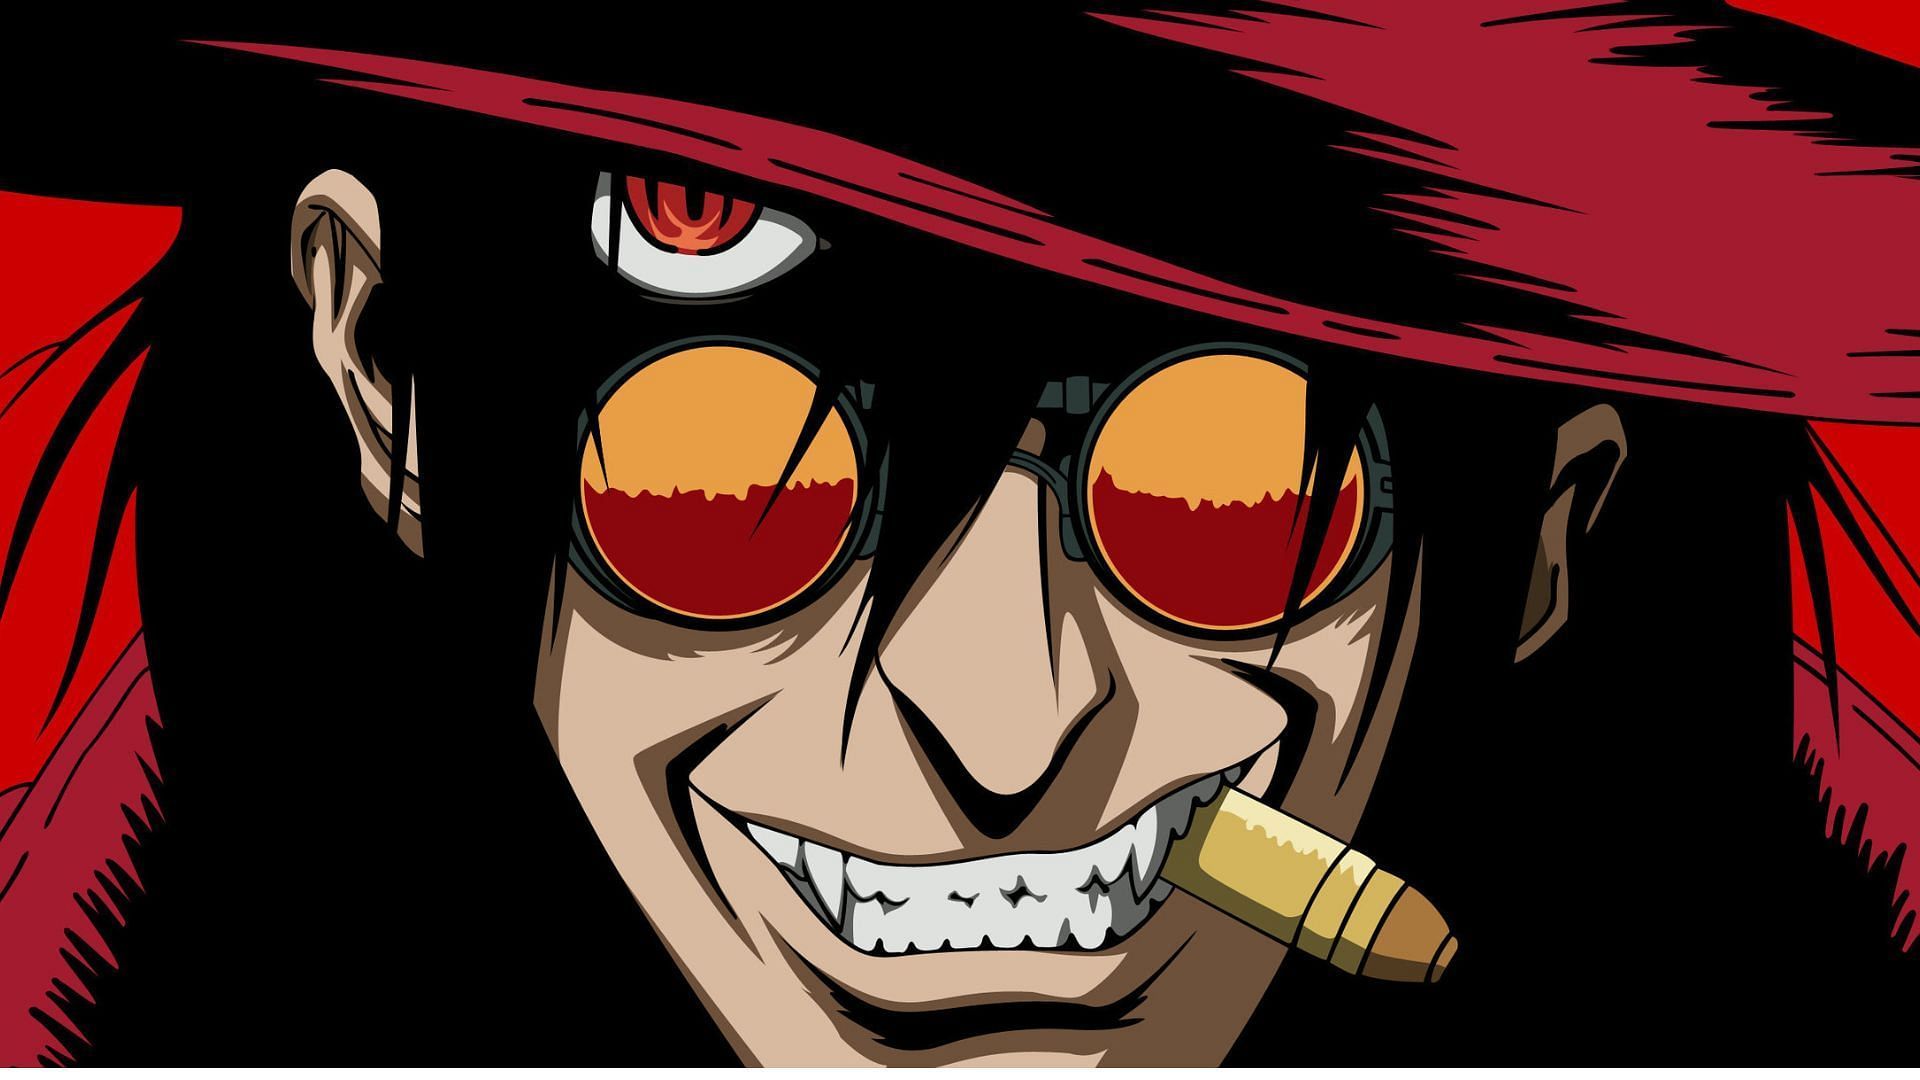 Download Integra Hellsing wallpapers for mobile phone, free